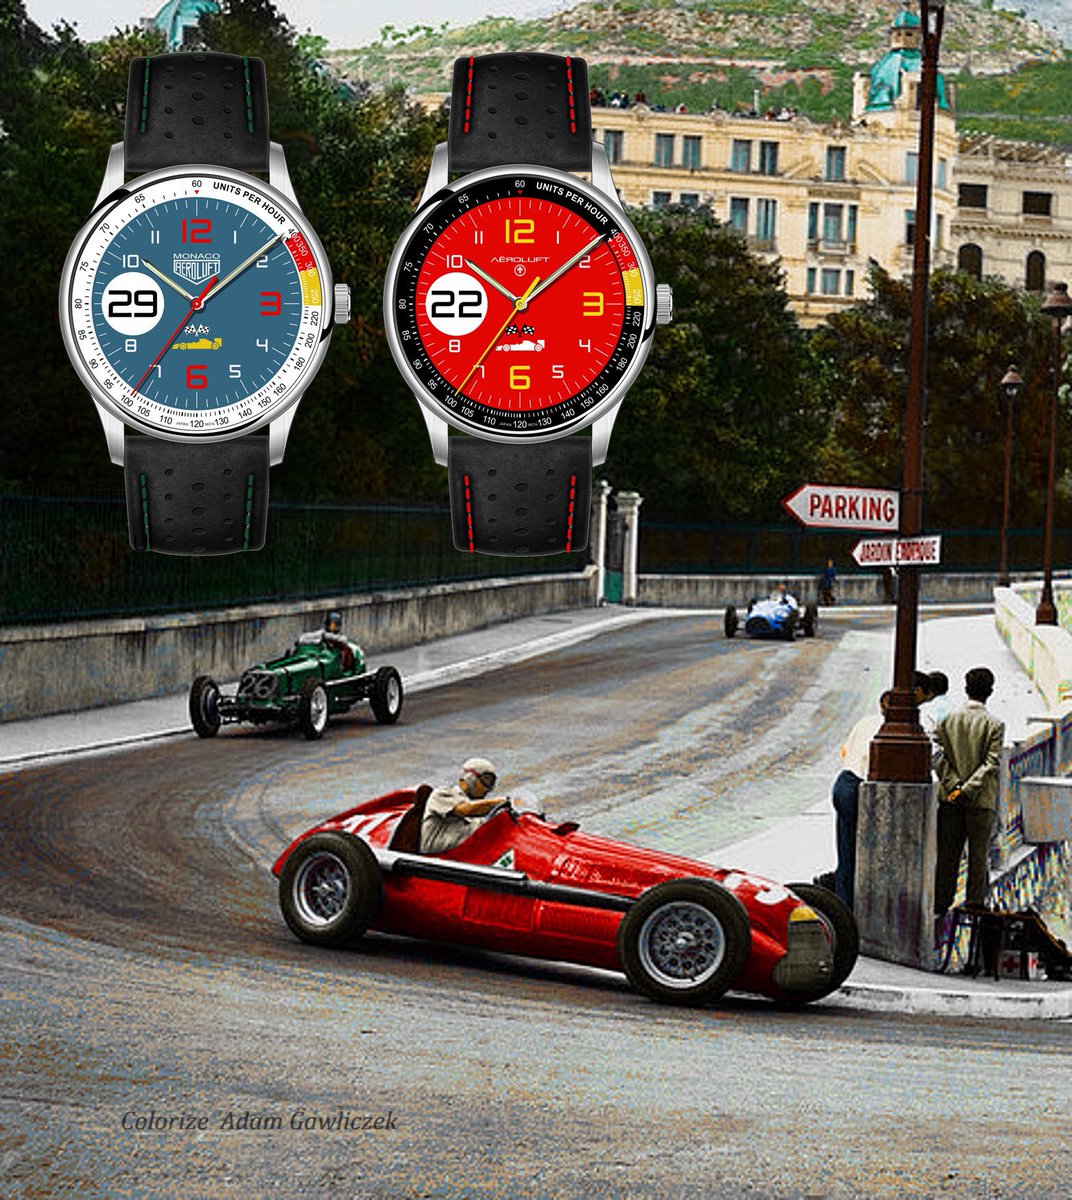 #Fangio in Monaco. Until the age of Schumacher and Hamilton any driver achieved what he did. F1 champion 5 times with 4 different brands: #AlfaRomeo, #Maserati, #Ferrari and #Mercedes

#formulaone #AEROLUFT #relojes #montres #uhren #orologi #watches #racingcars #classiccars